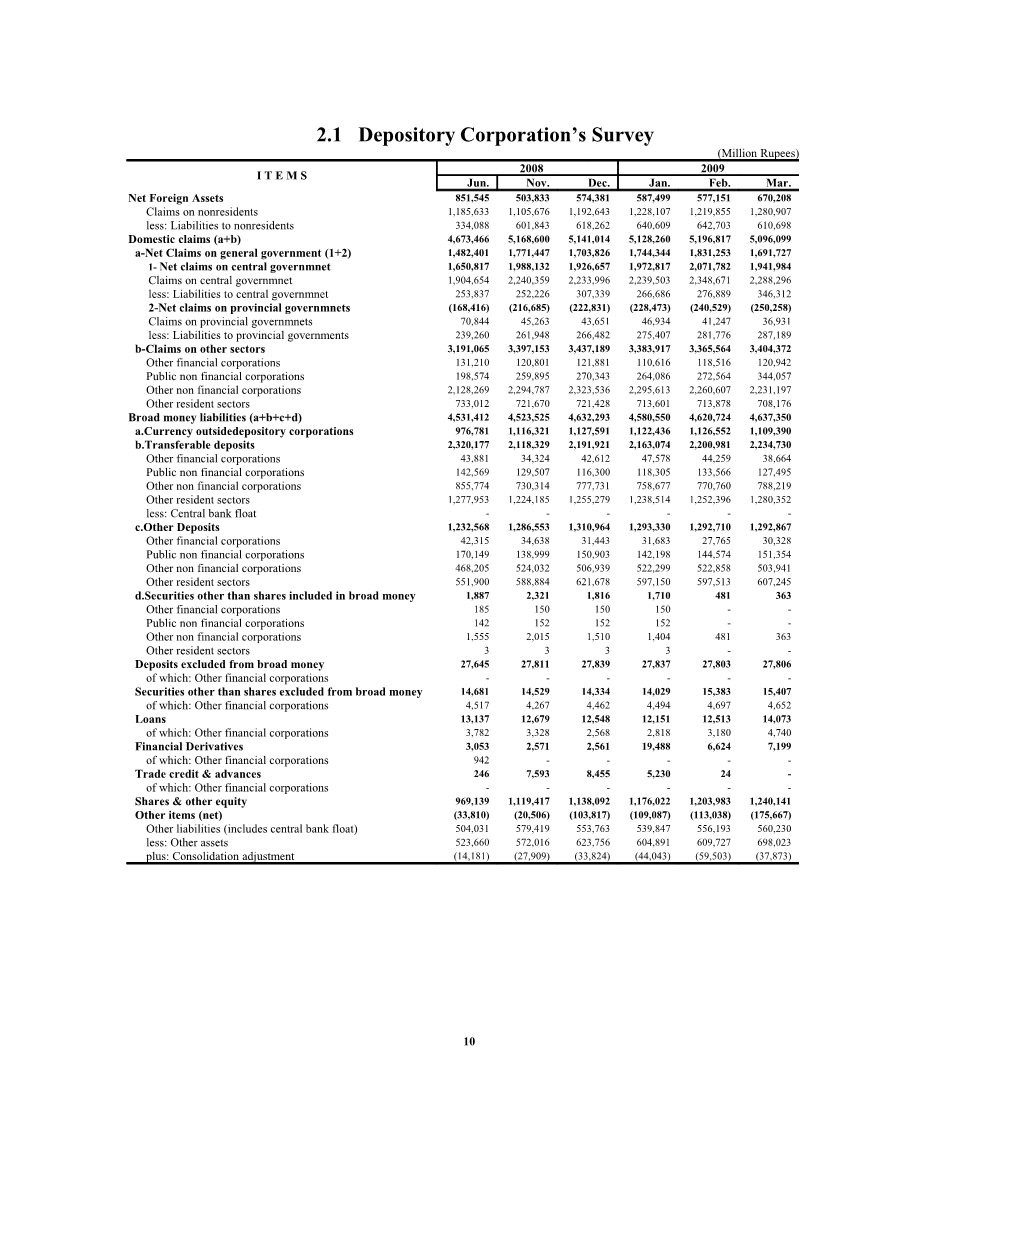 2.3 Analytical Accounts of Other Depository Corporations